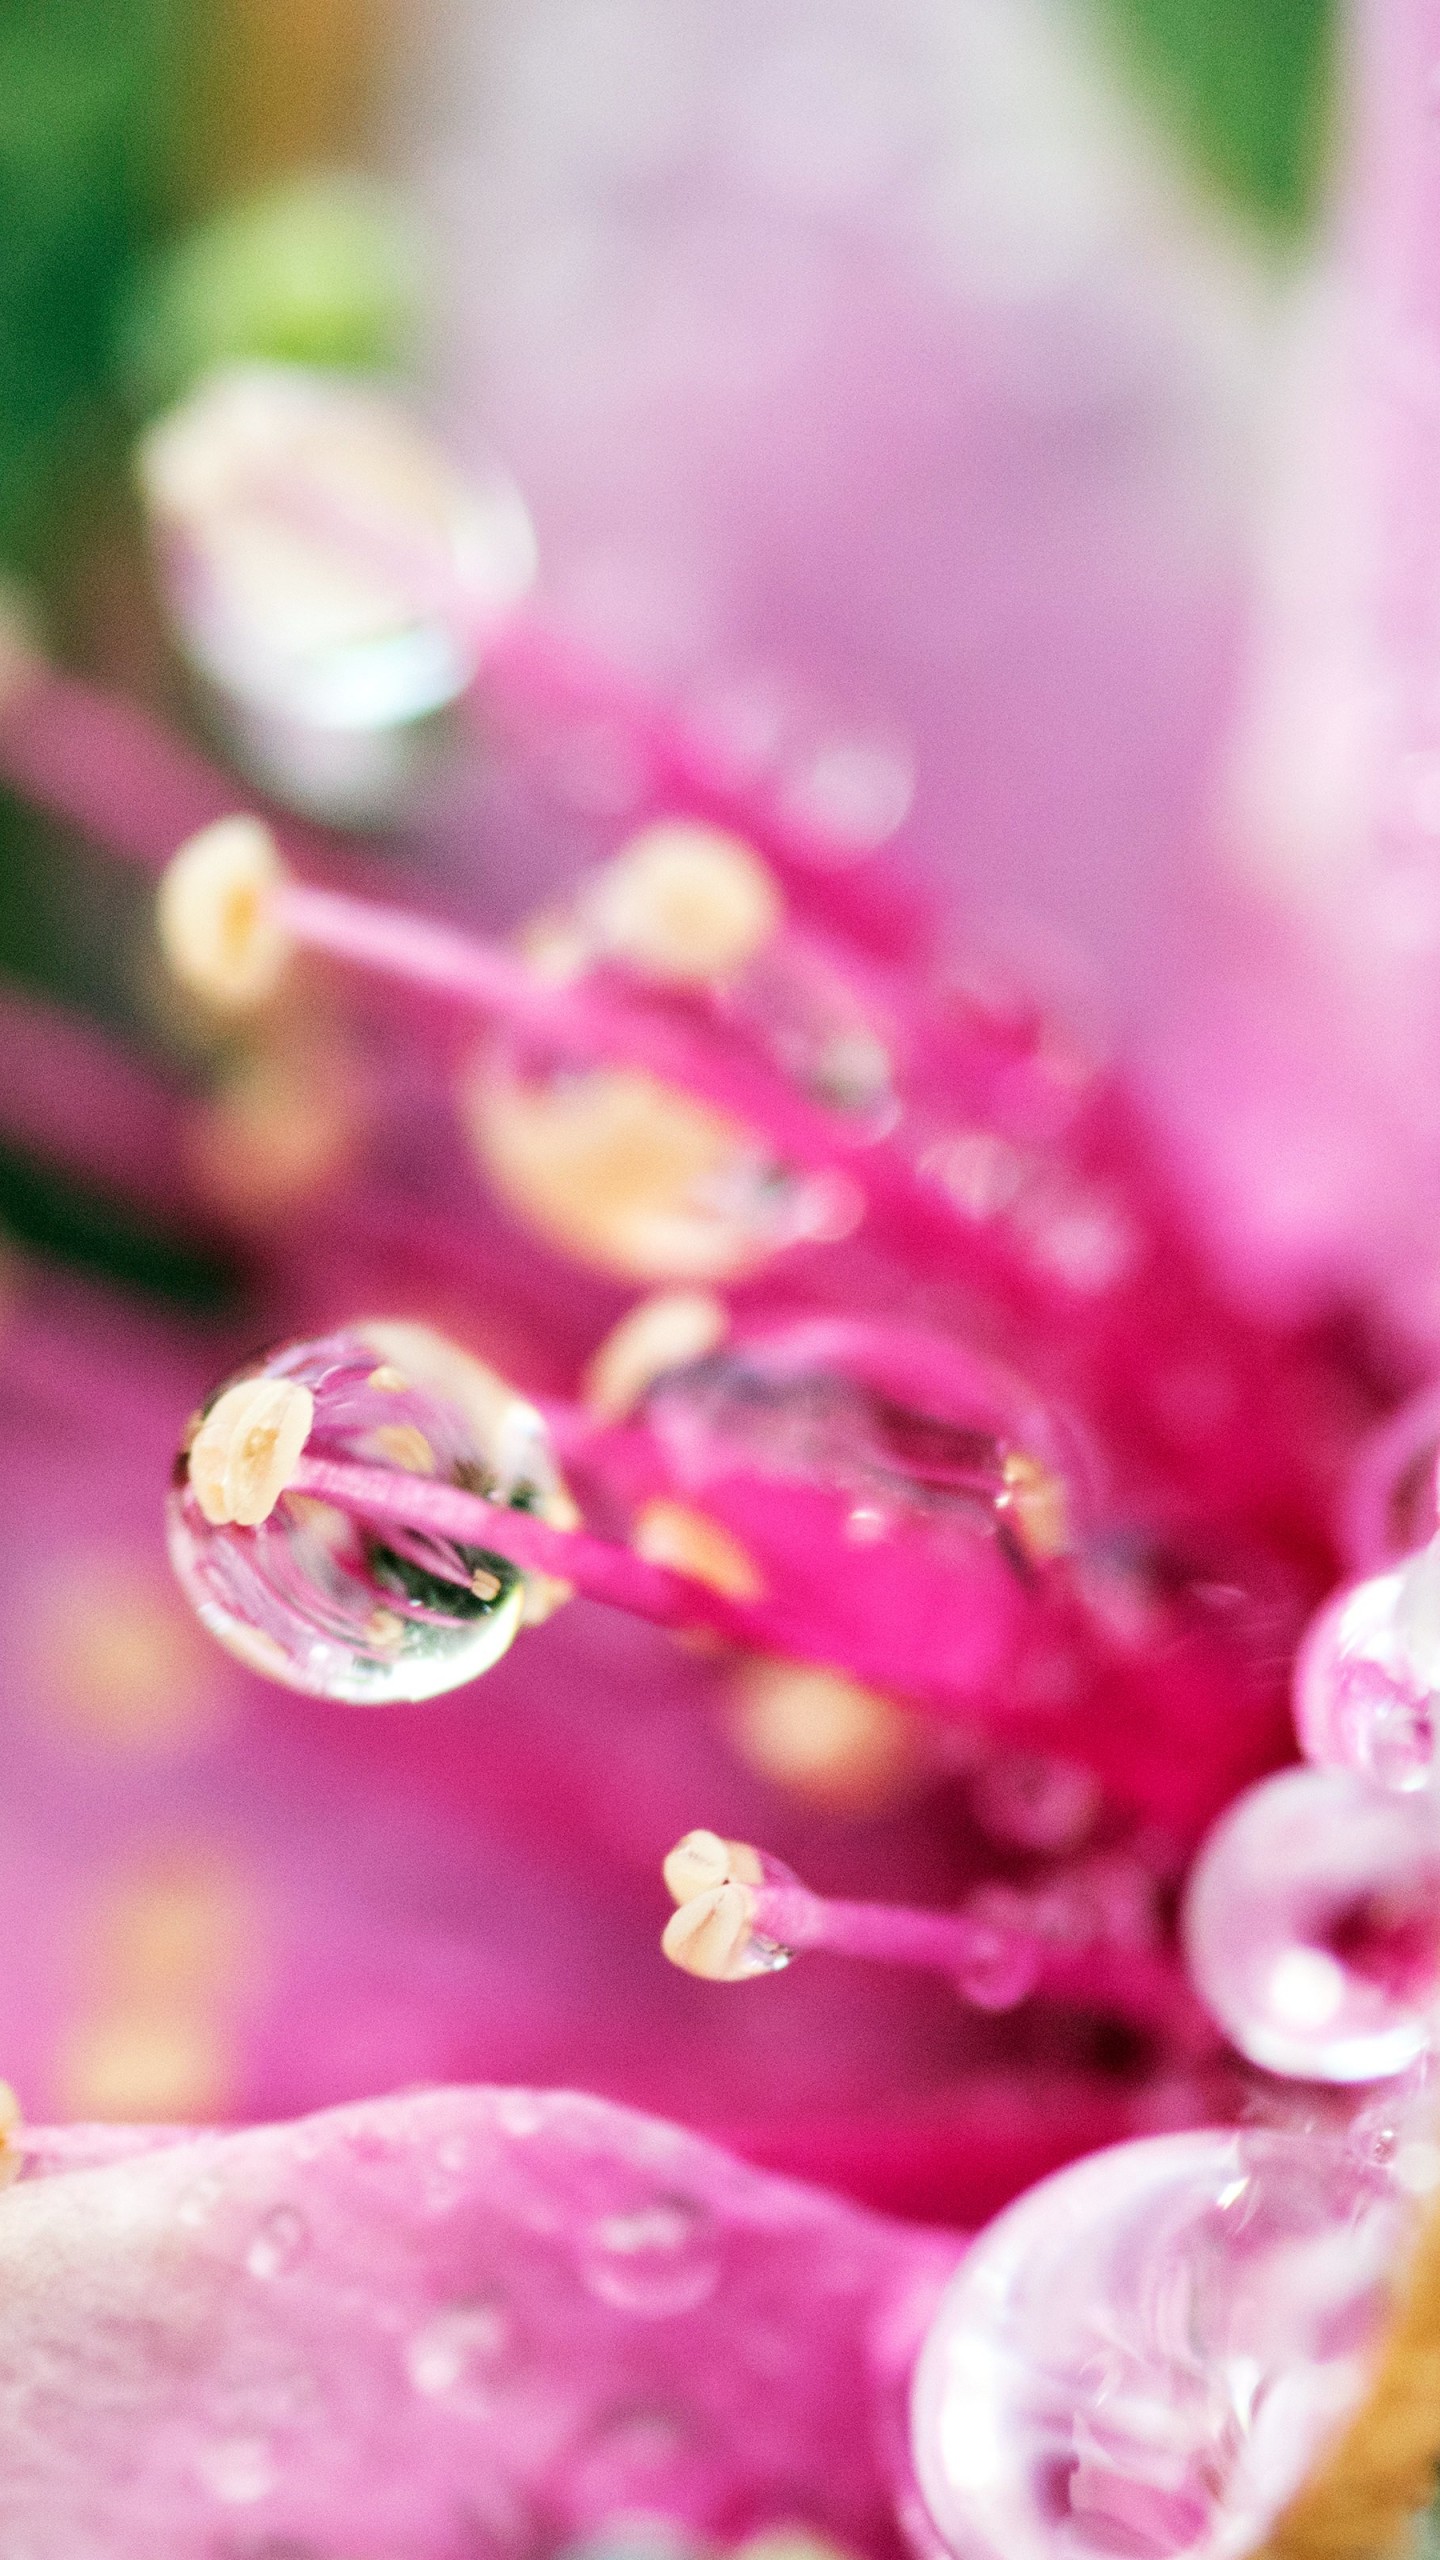 Flower Tears Wallpaper for SAMSUNG Galaxy Note 4